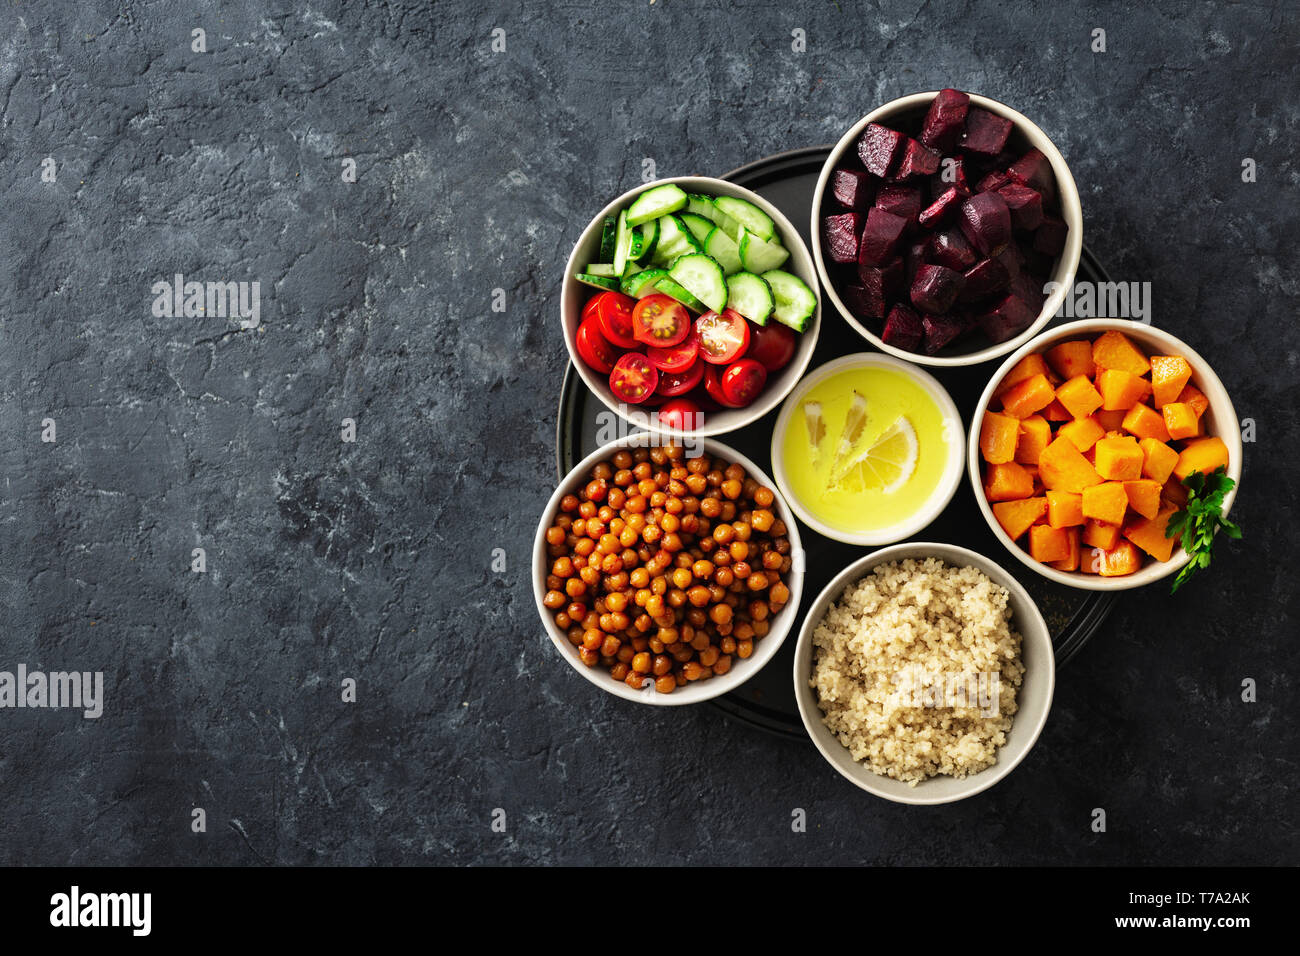 Healthy vegetarian ingredients for cooking moroccan salad. Chickpeas, Baked pumpkin and beets, quinoa and vegetables top view copy space Stock Photo